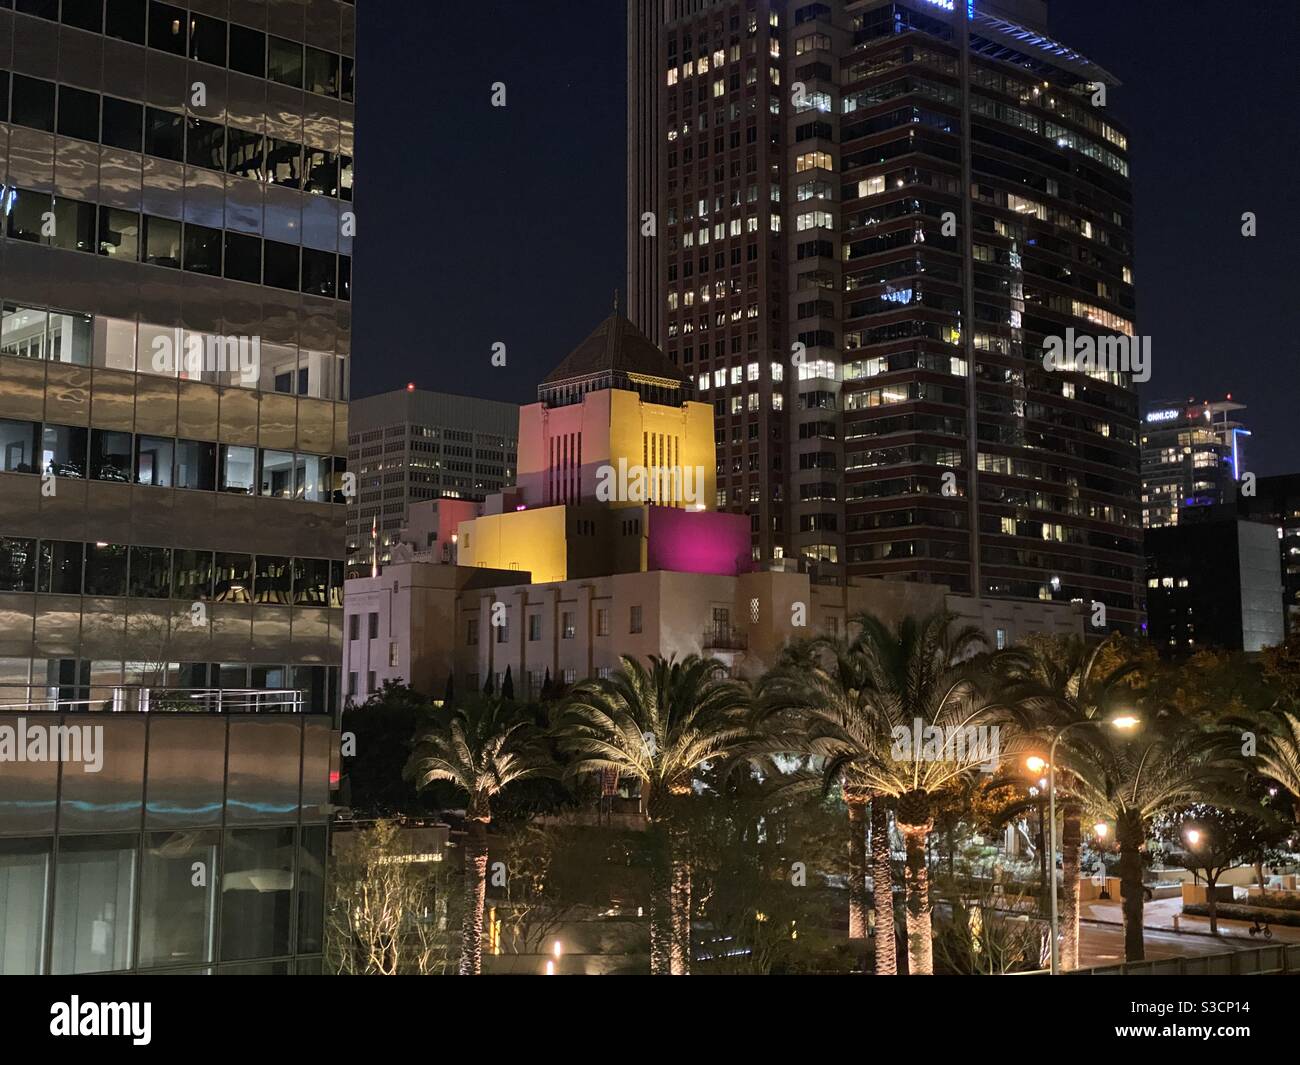 LOS ANGELES, CA, OCT 2020: Los Angeles Central Library in Downtown, lit up in gold and purple at night, to commemorate the anniversary of the death of Lakers basketball player Kobe Bryant Stock Photo